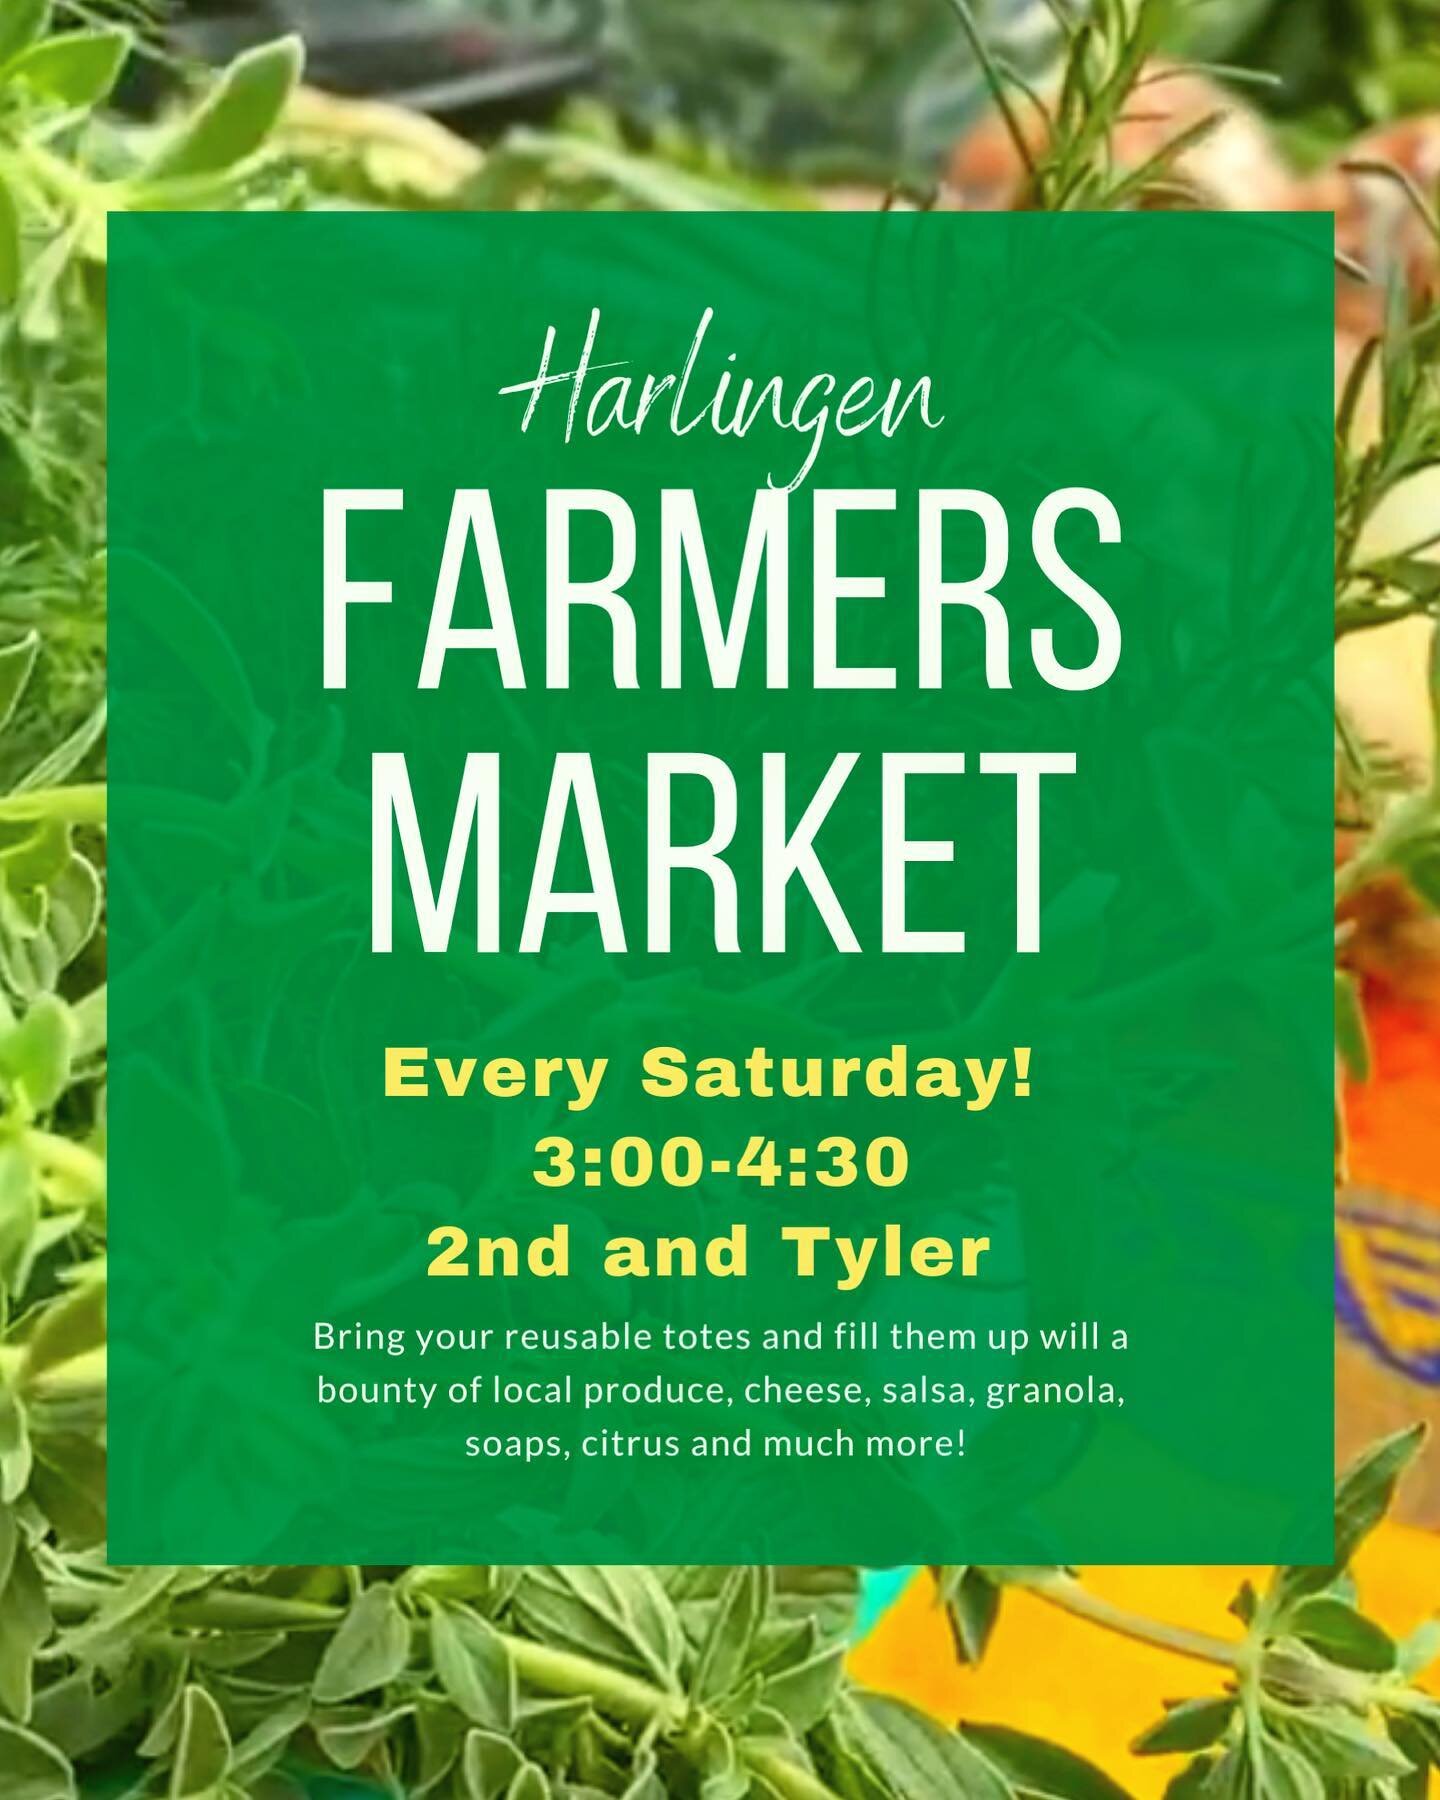 Come support local farmers and friends at The Harlingen Farmers Market! There is always something new to enjoy every Saturday from 3-4:30.
2nd and Tyler

Saturday
Live Music by Sandra Mink